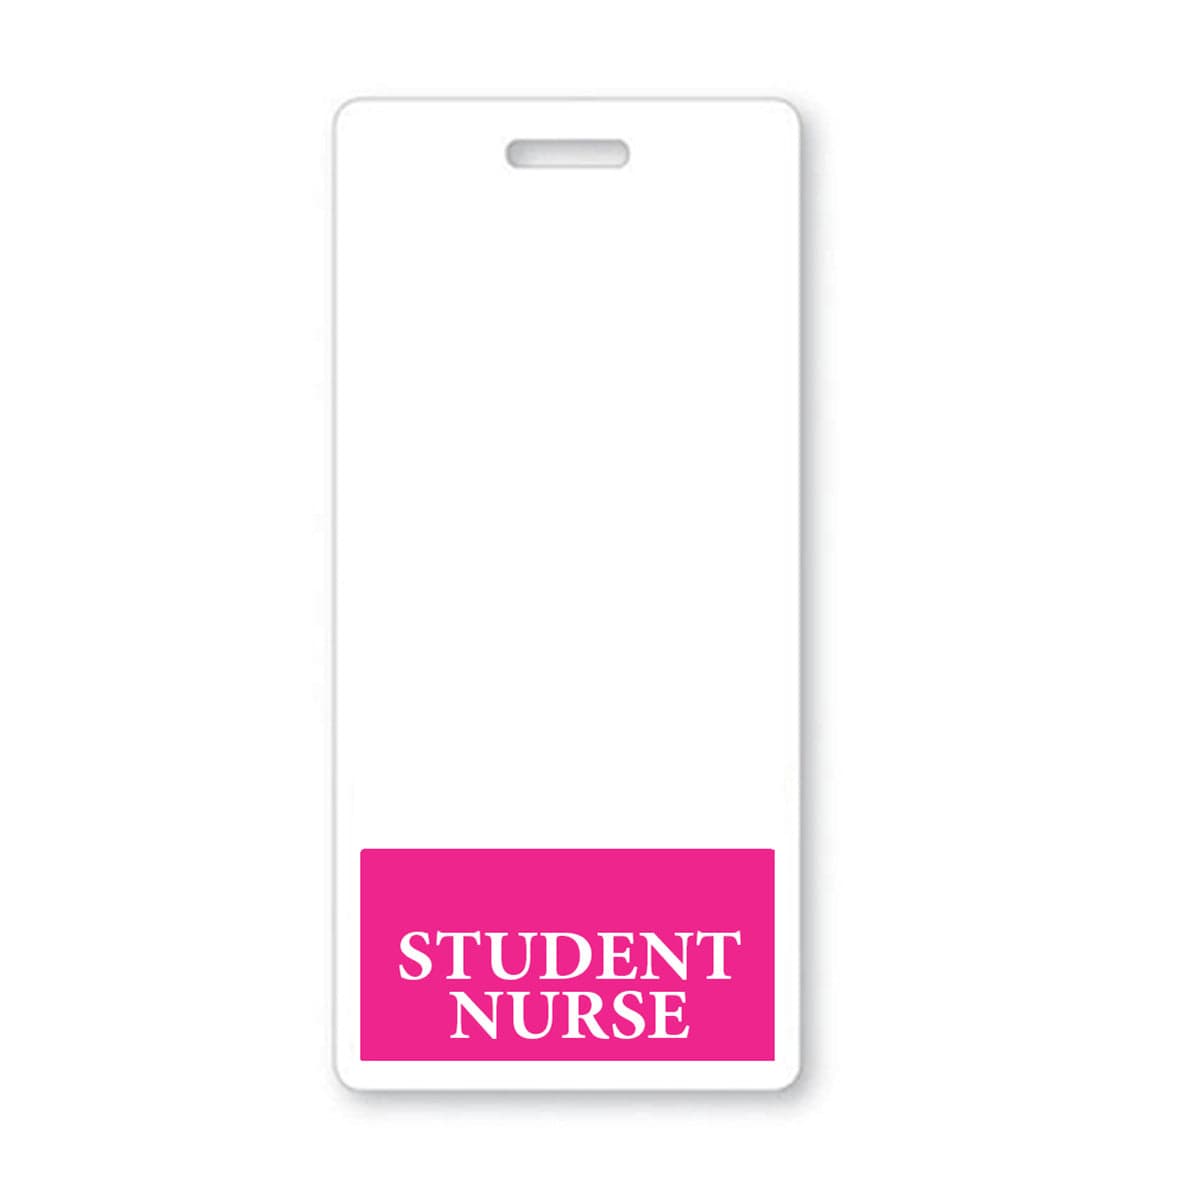 STUDENT NURSE Vertical Badge Buddy with Color Border